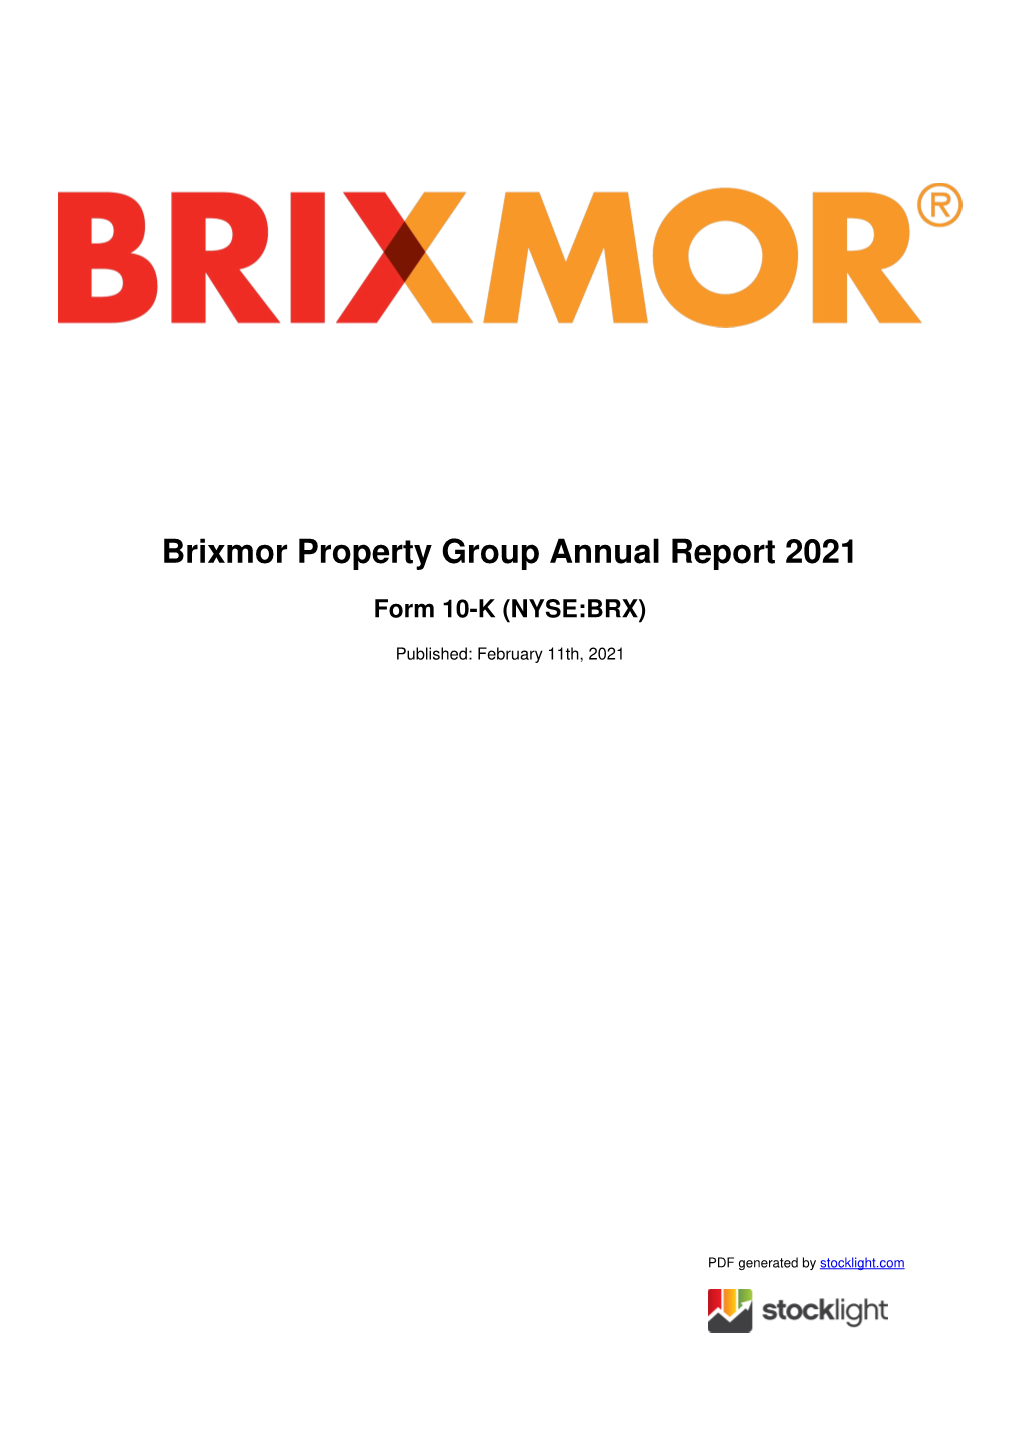 Brixmor Property Group Annual Report 2021